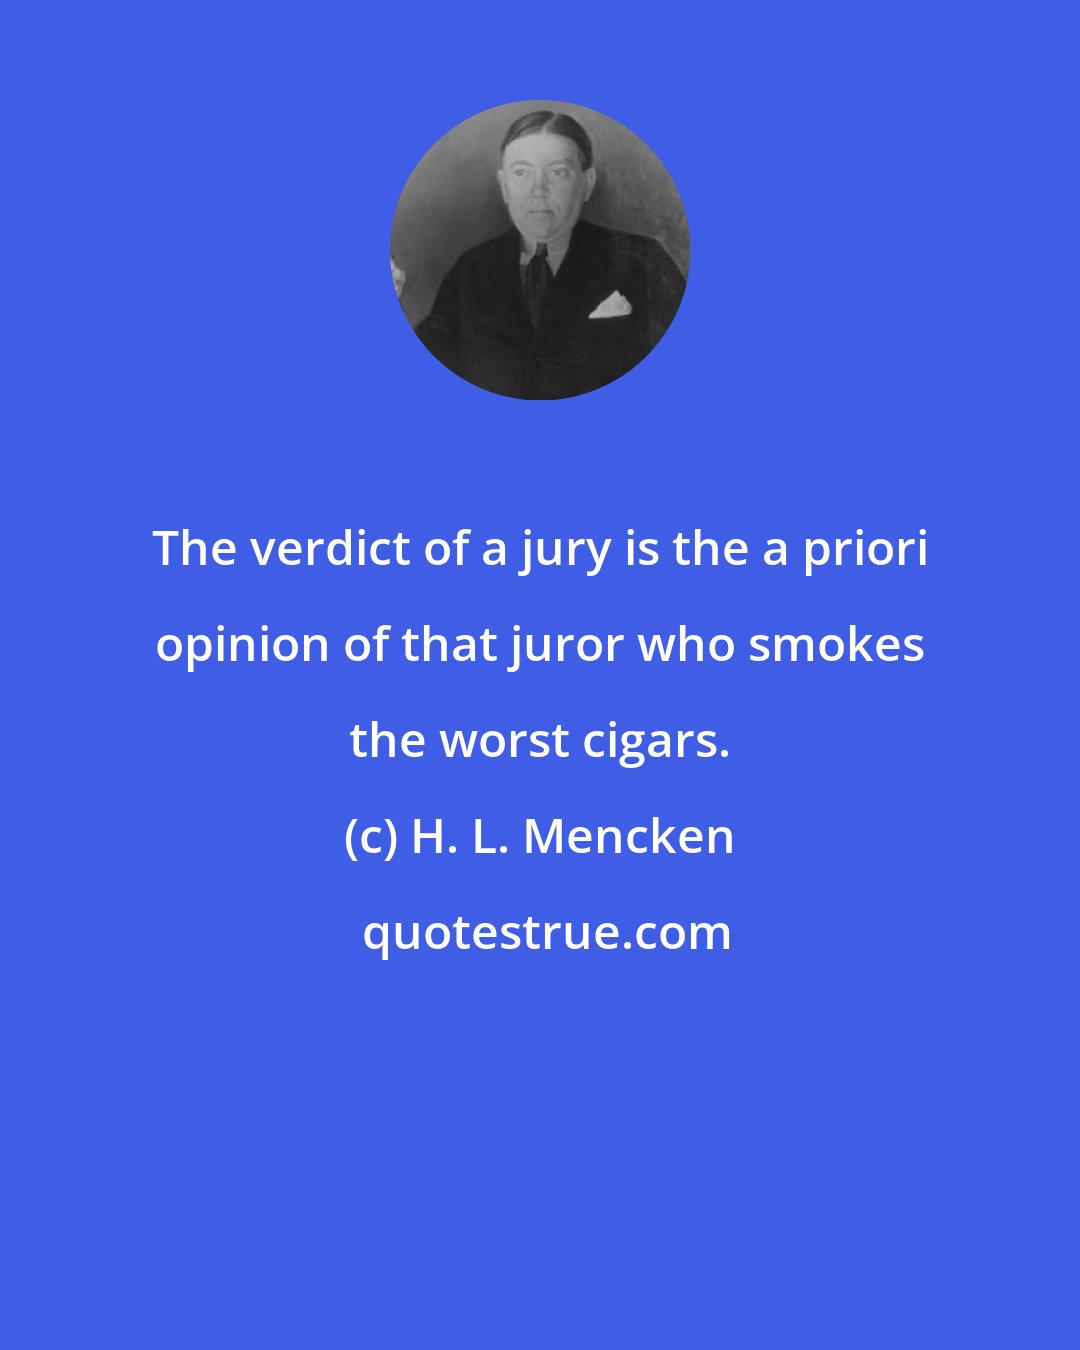 H. L. Mencken: The verdict of a jury is the a priori opinion of that juror who smokes the worst cigars.